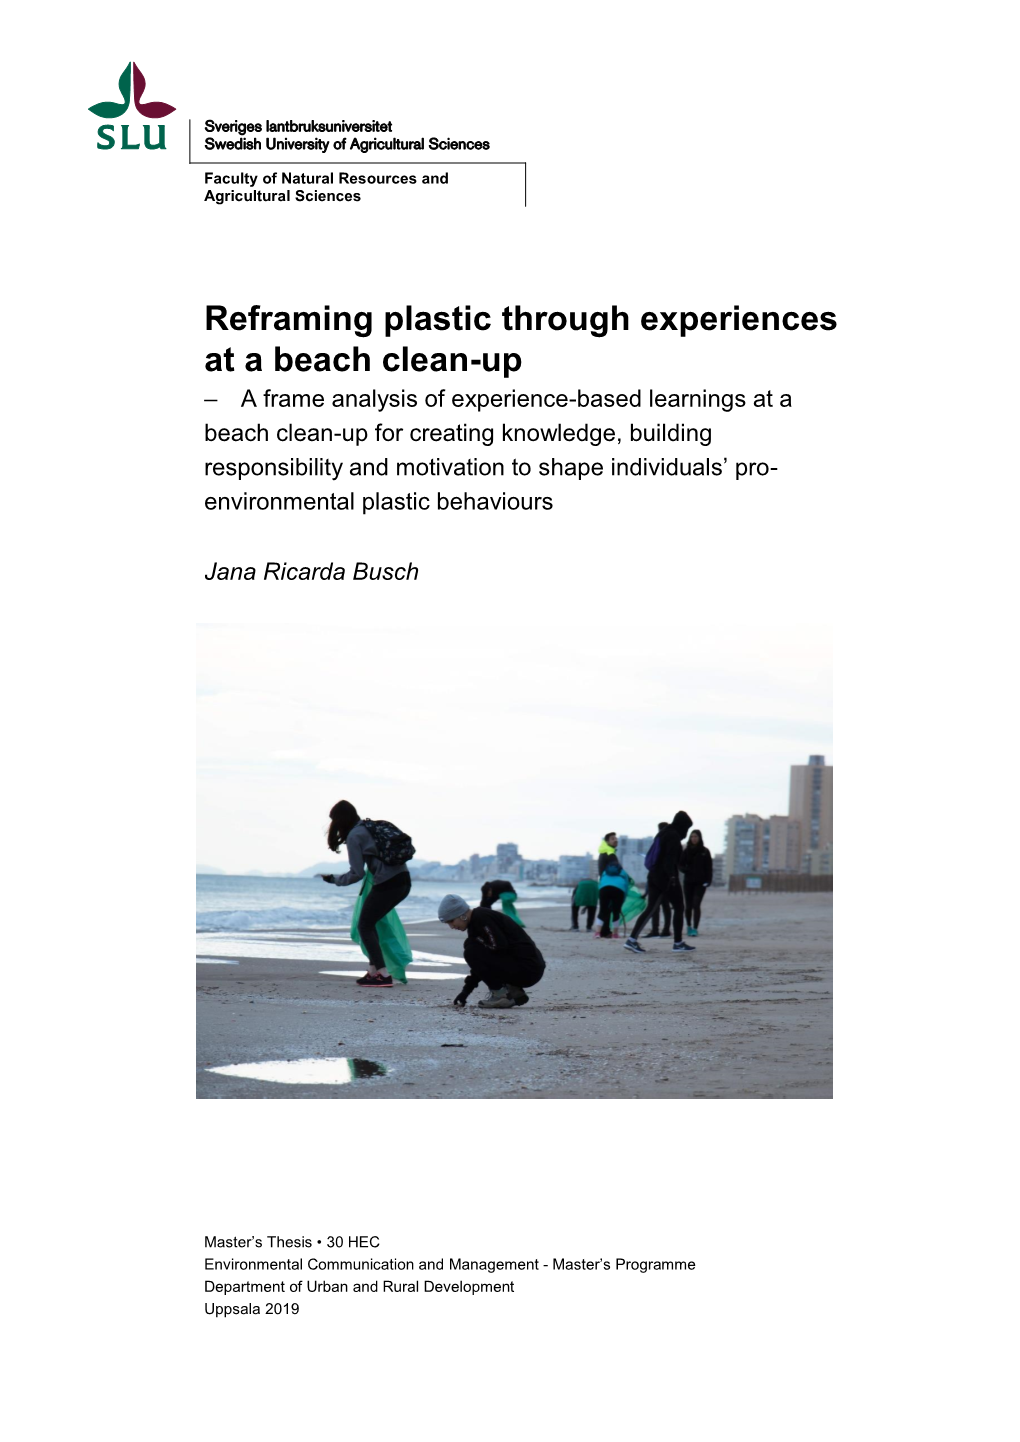 Reframing Plastic Through Experiences at a Beach Clean-Up